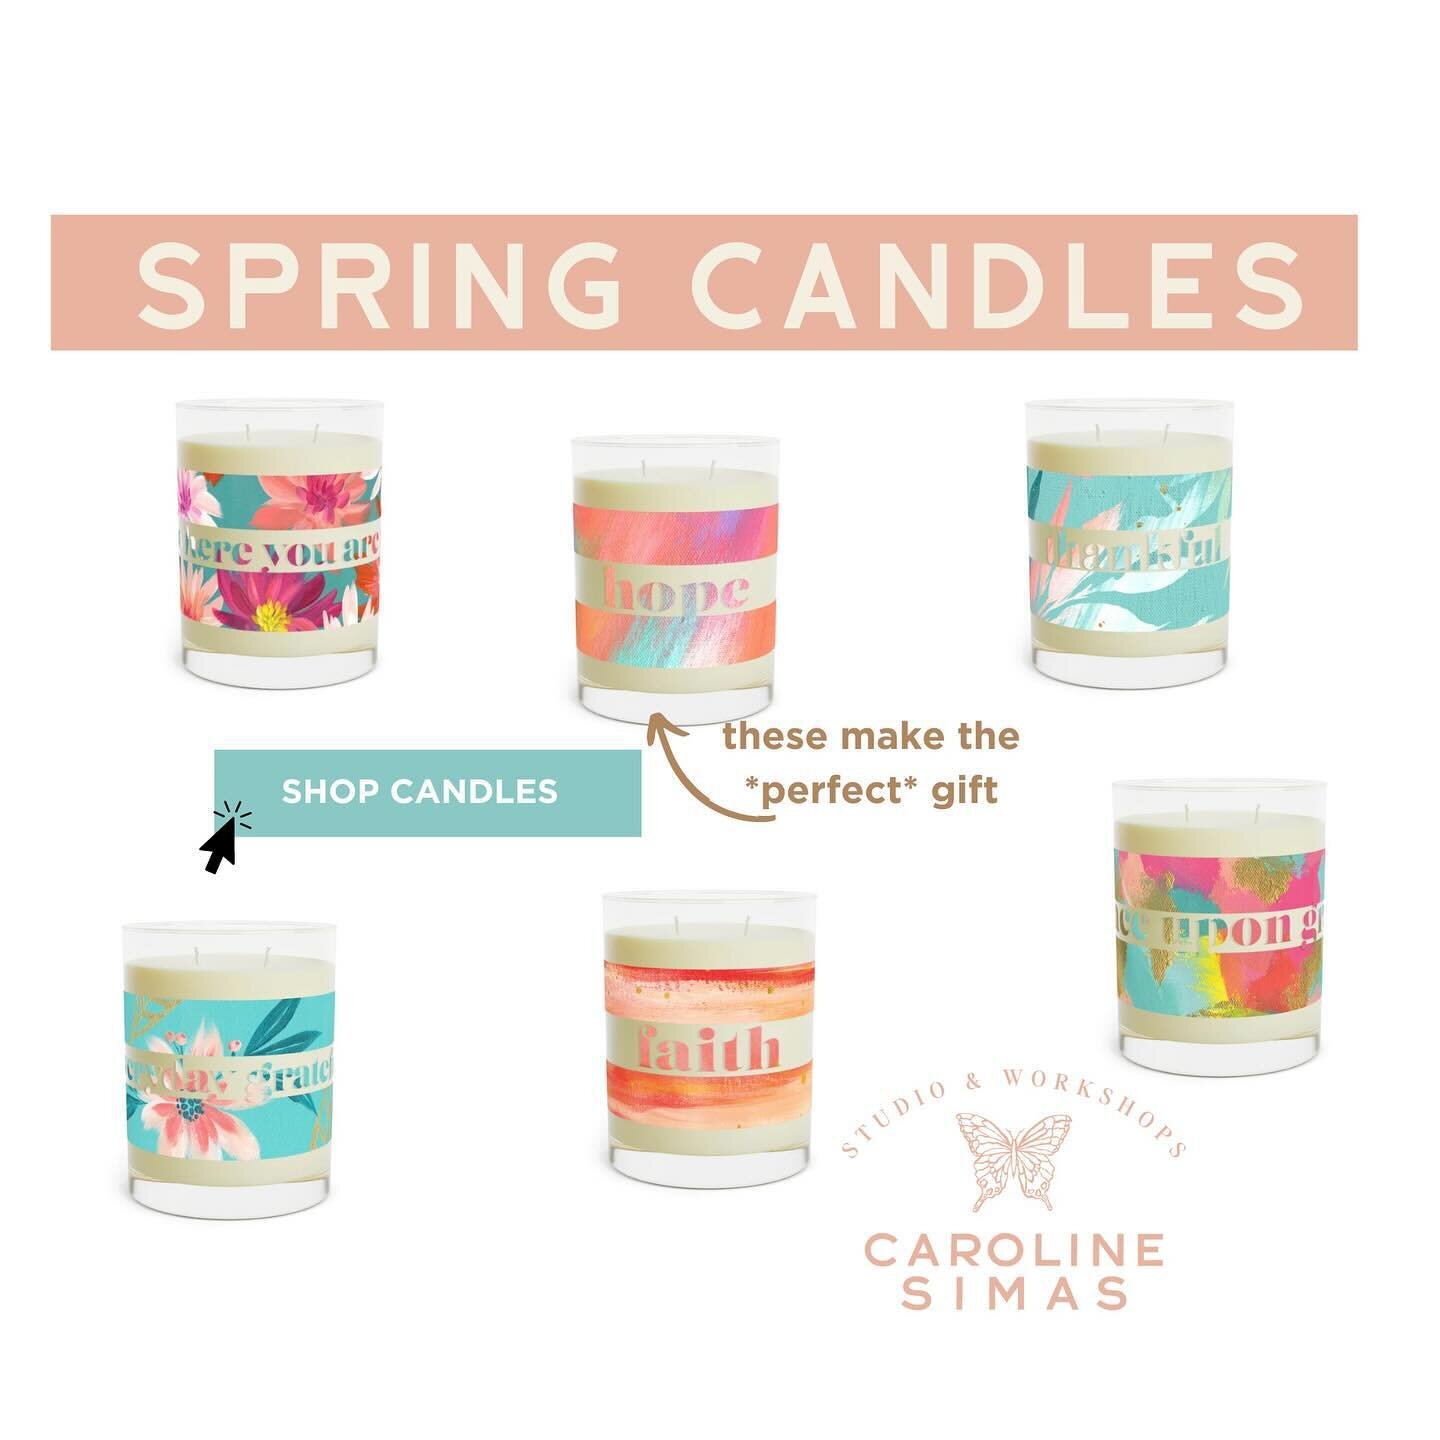 Breathe in SPRING! My White Tea &amp; Fig scented candles come in 11oz jars and add a personal touch to your home&rsquo;s aromatherapy. Made with 100% food-grade soy wax and the finest fragrance oils, this personalized candle is Phthalate and Lead&nd